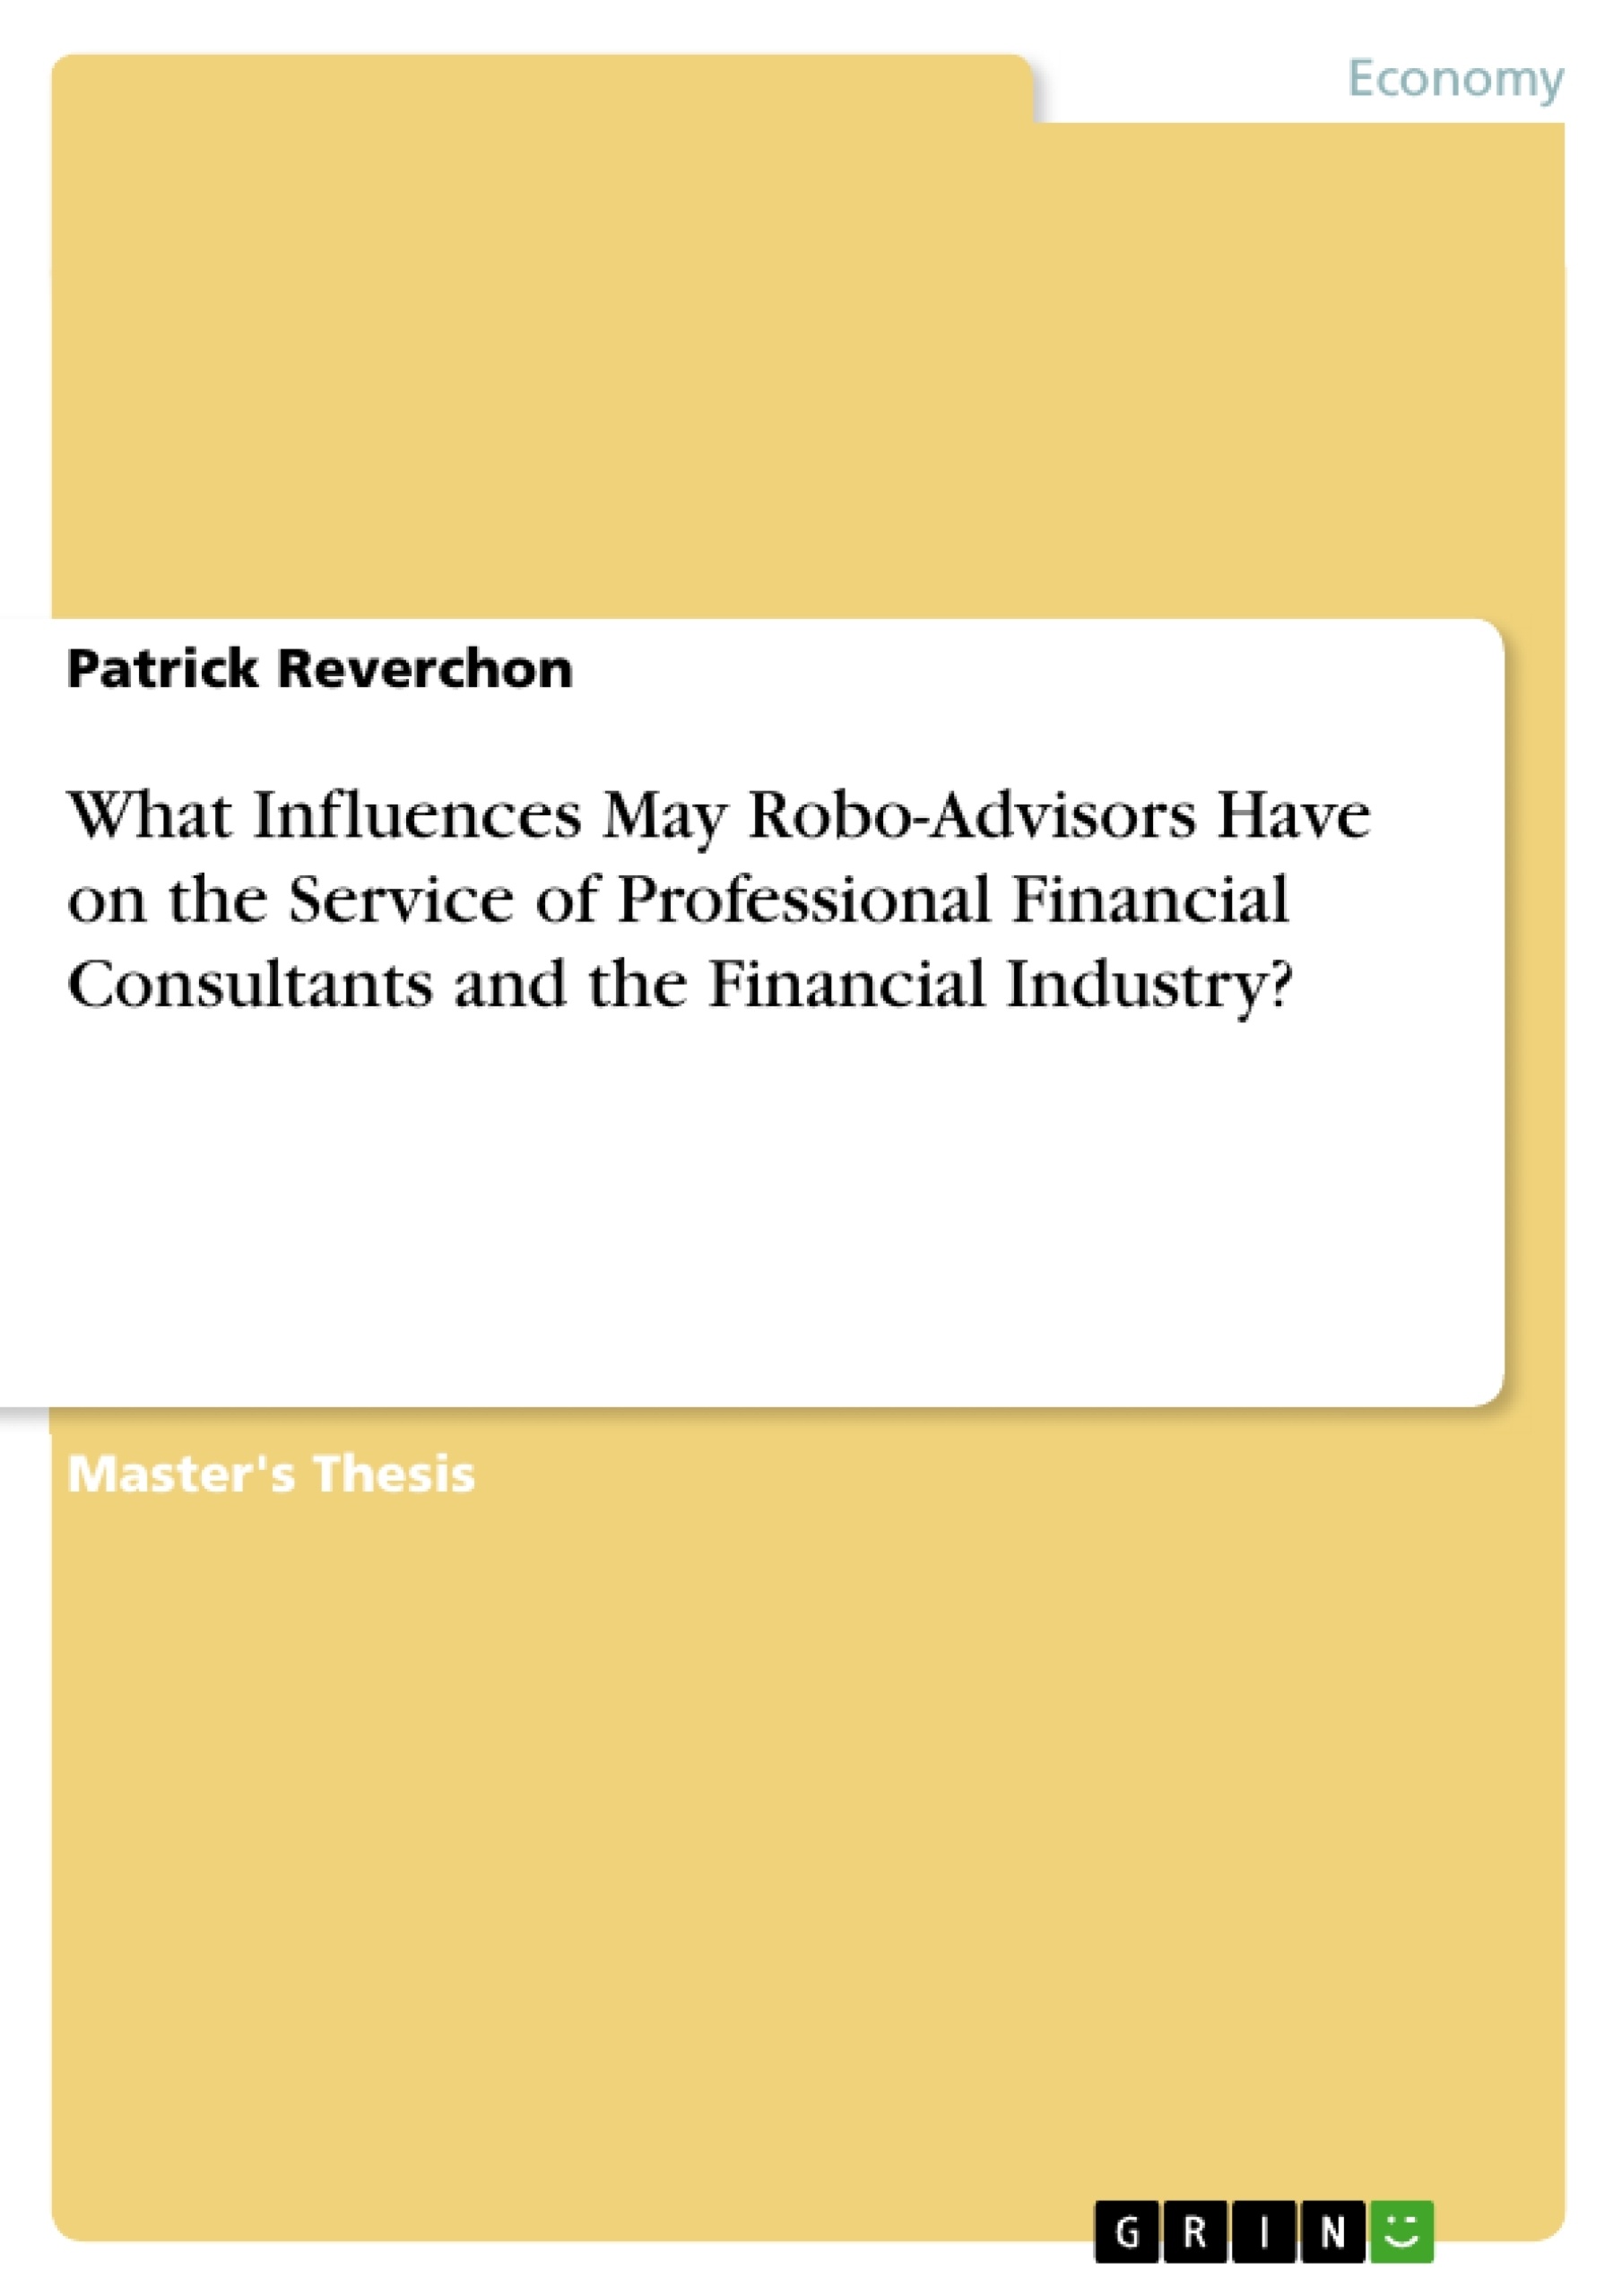 Titre: What Influences May Robo-Advisors Have on the Service of Professional Financial Consultants and the Financial Industry?